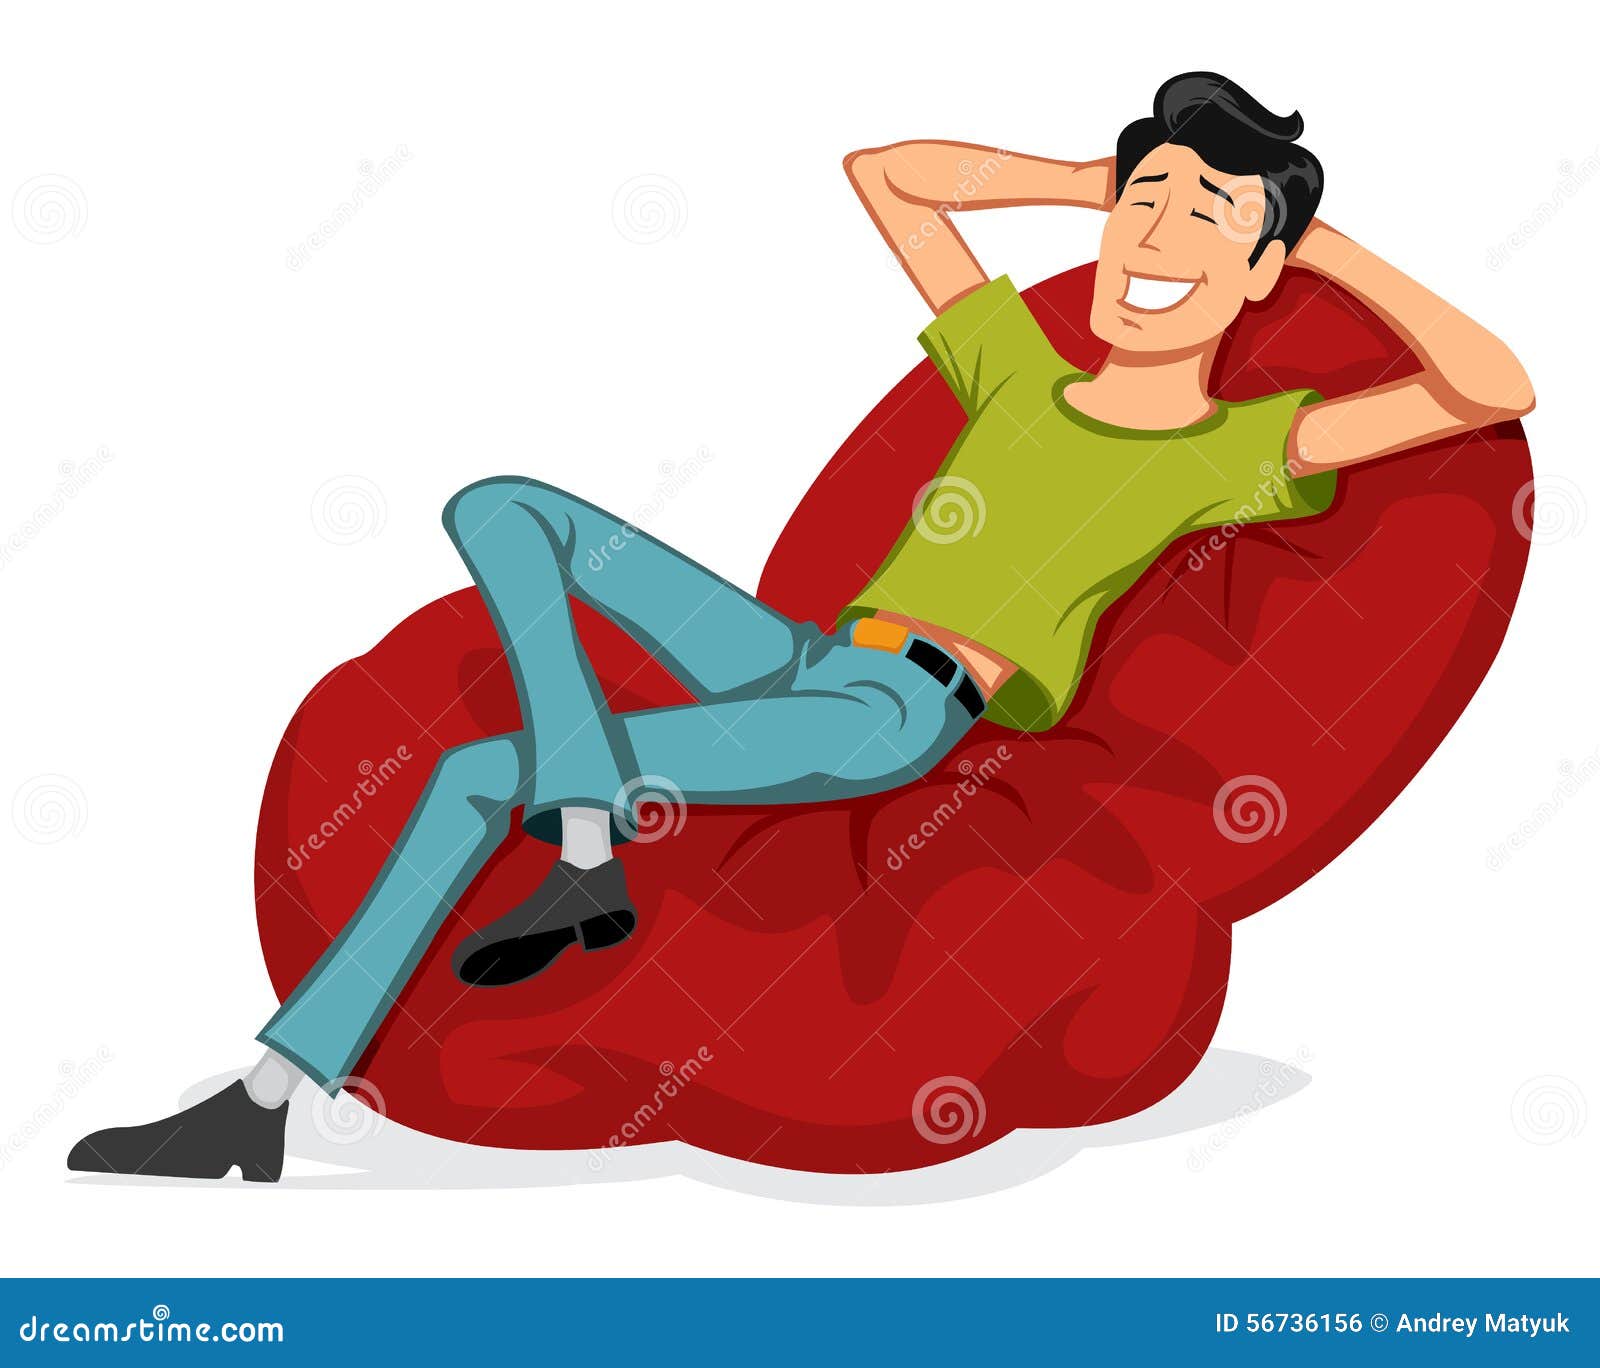 relaxation clipart images - photo #43